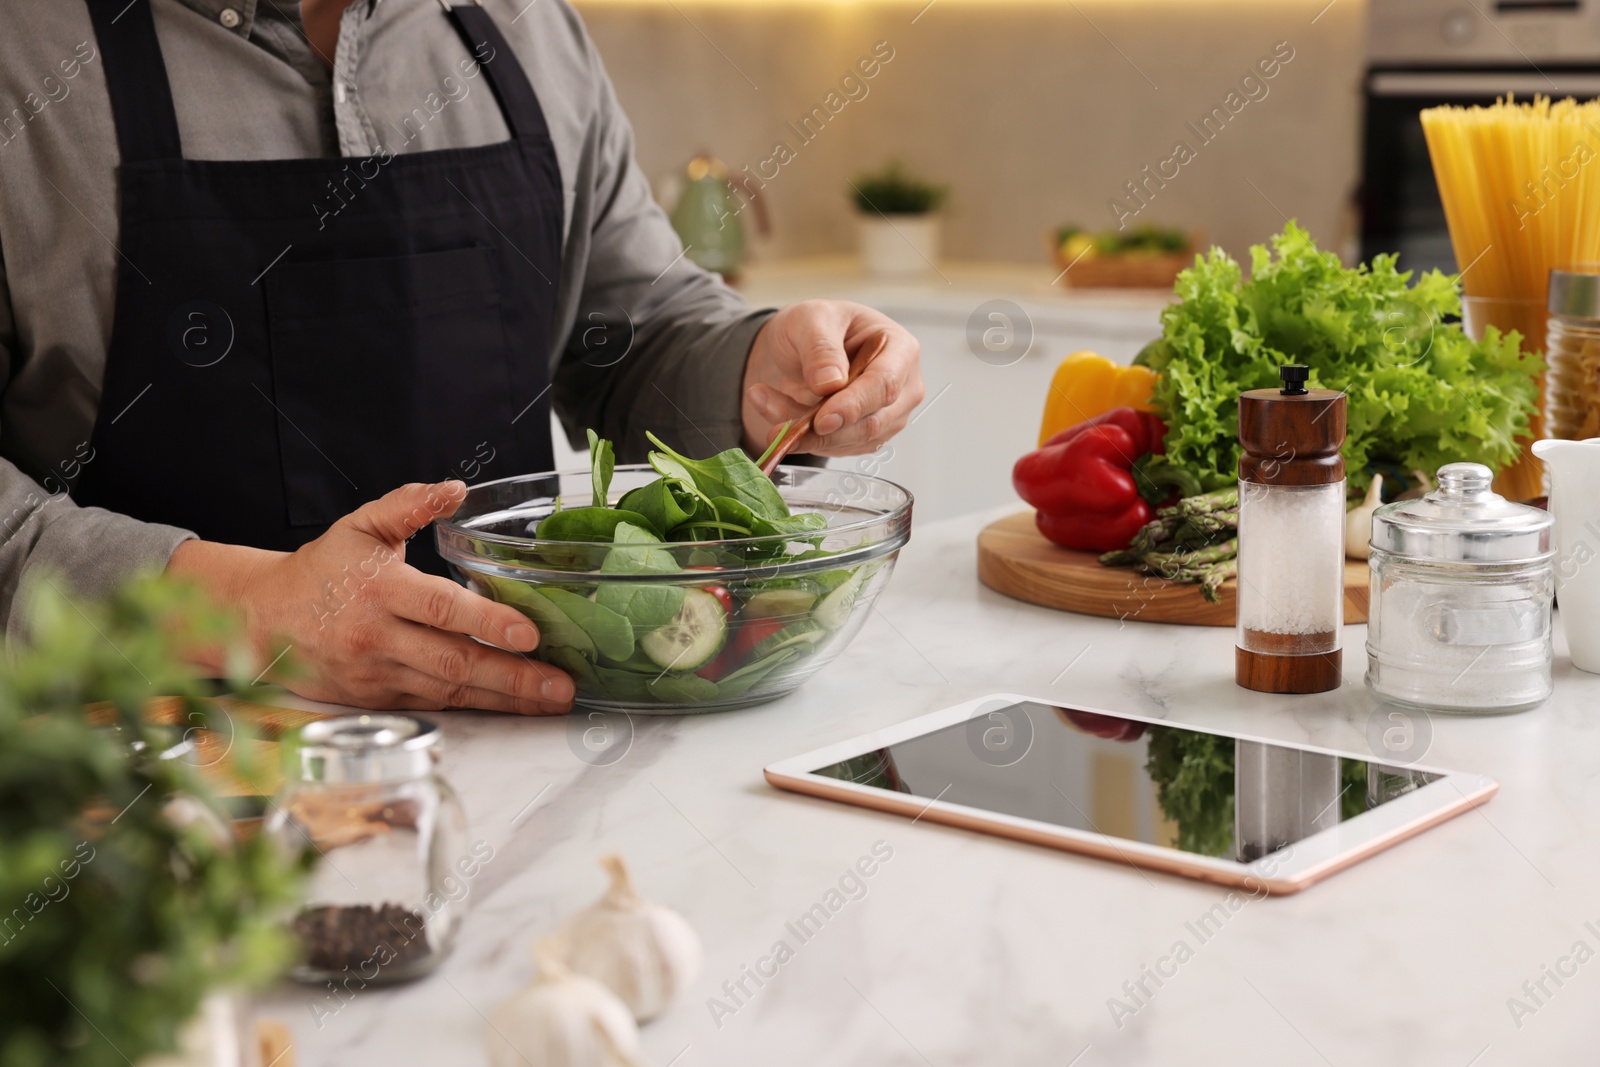 Photo of Man cooking salad at white marble countertop in kitchen, closeup